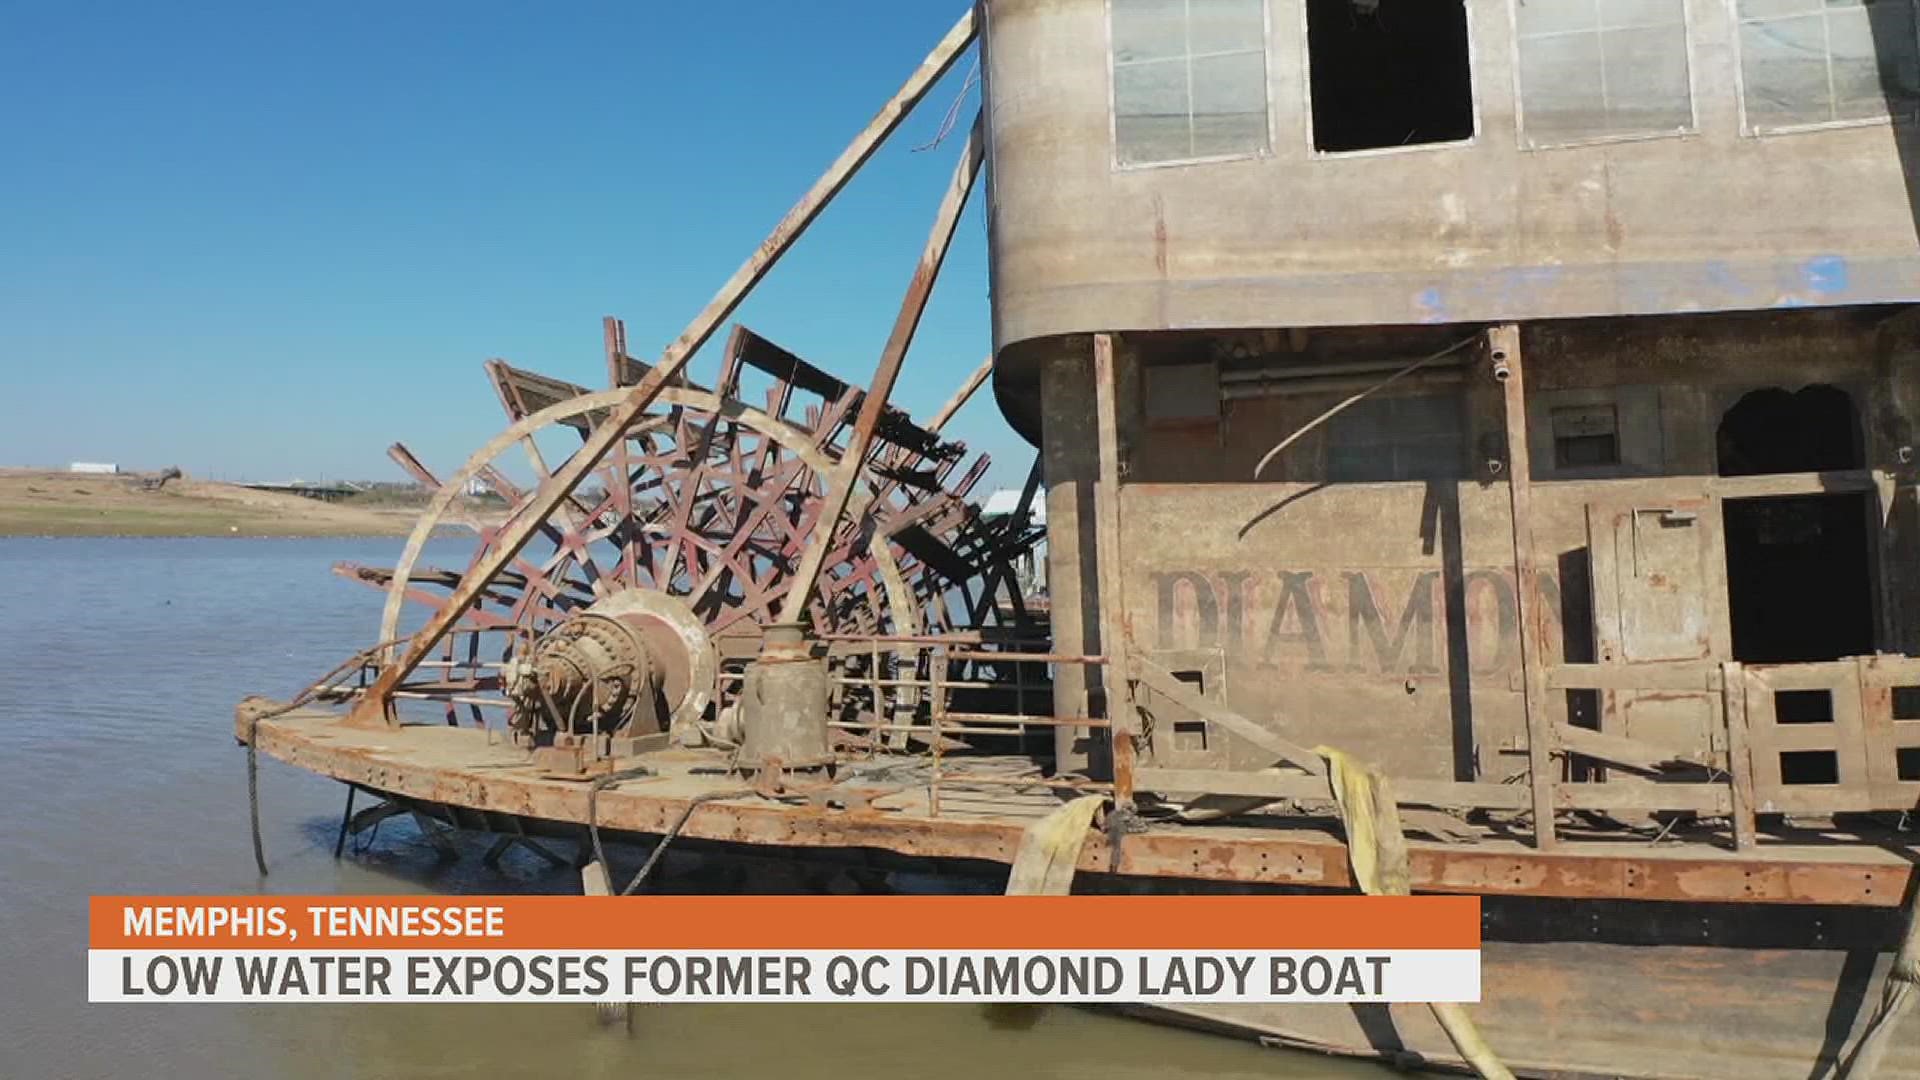 The historic gambling riverboat christened in Bettendorf, Iowa during the early 90s is now fully exposed due to the low water levels, revealing extensive damage.